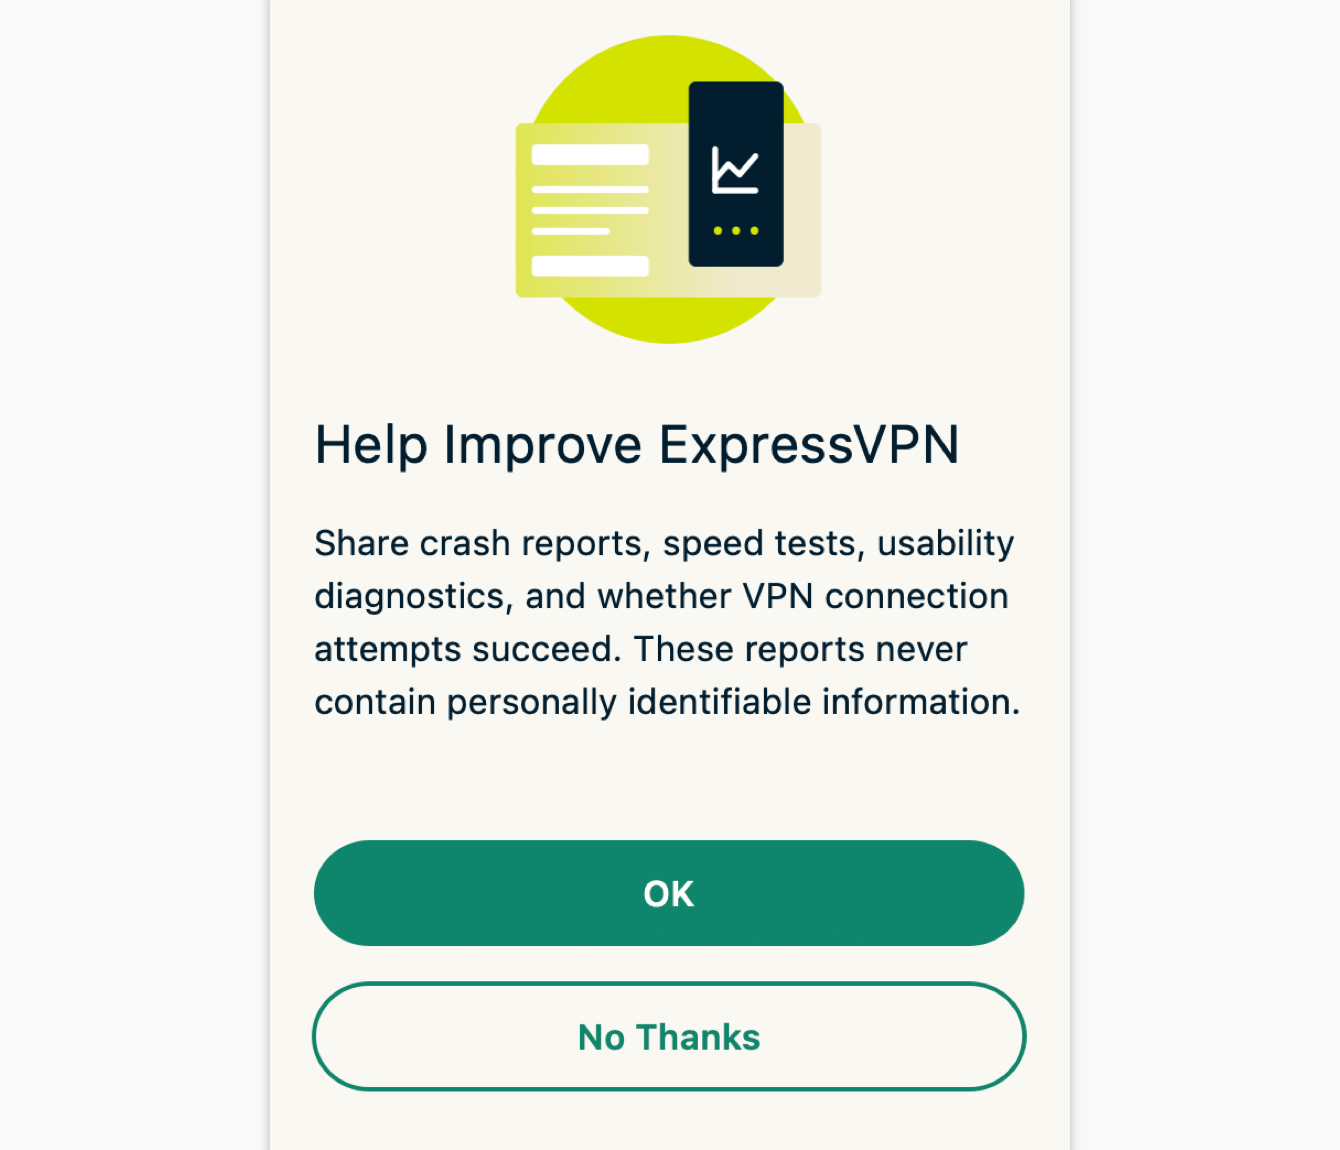 Select your preference for helping improve ExpressVPN.